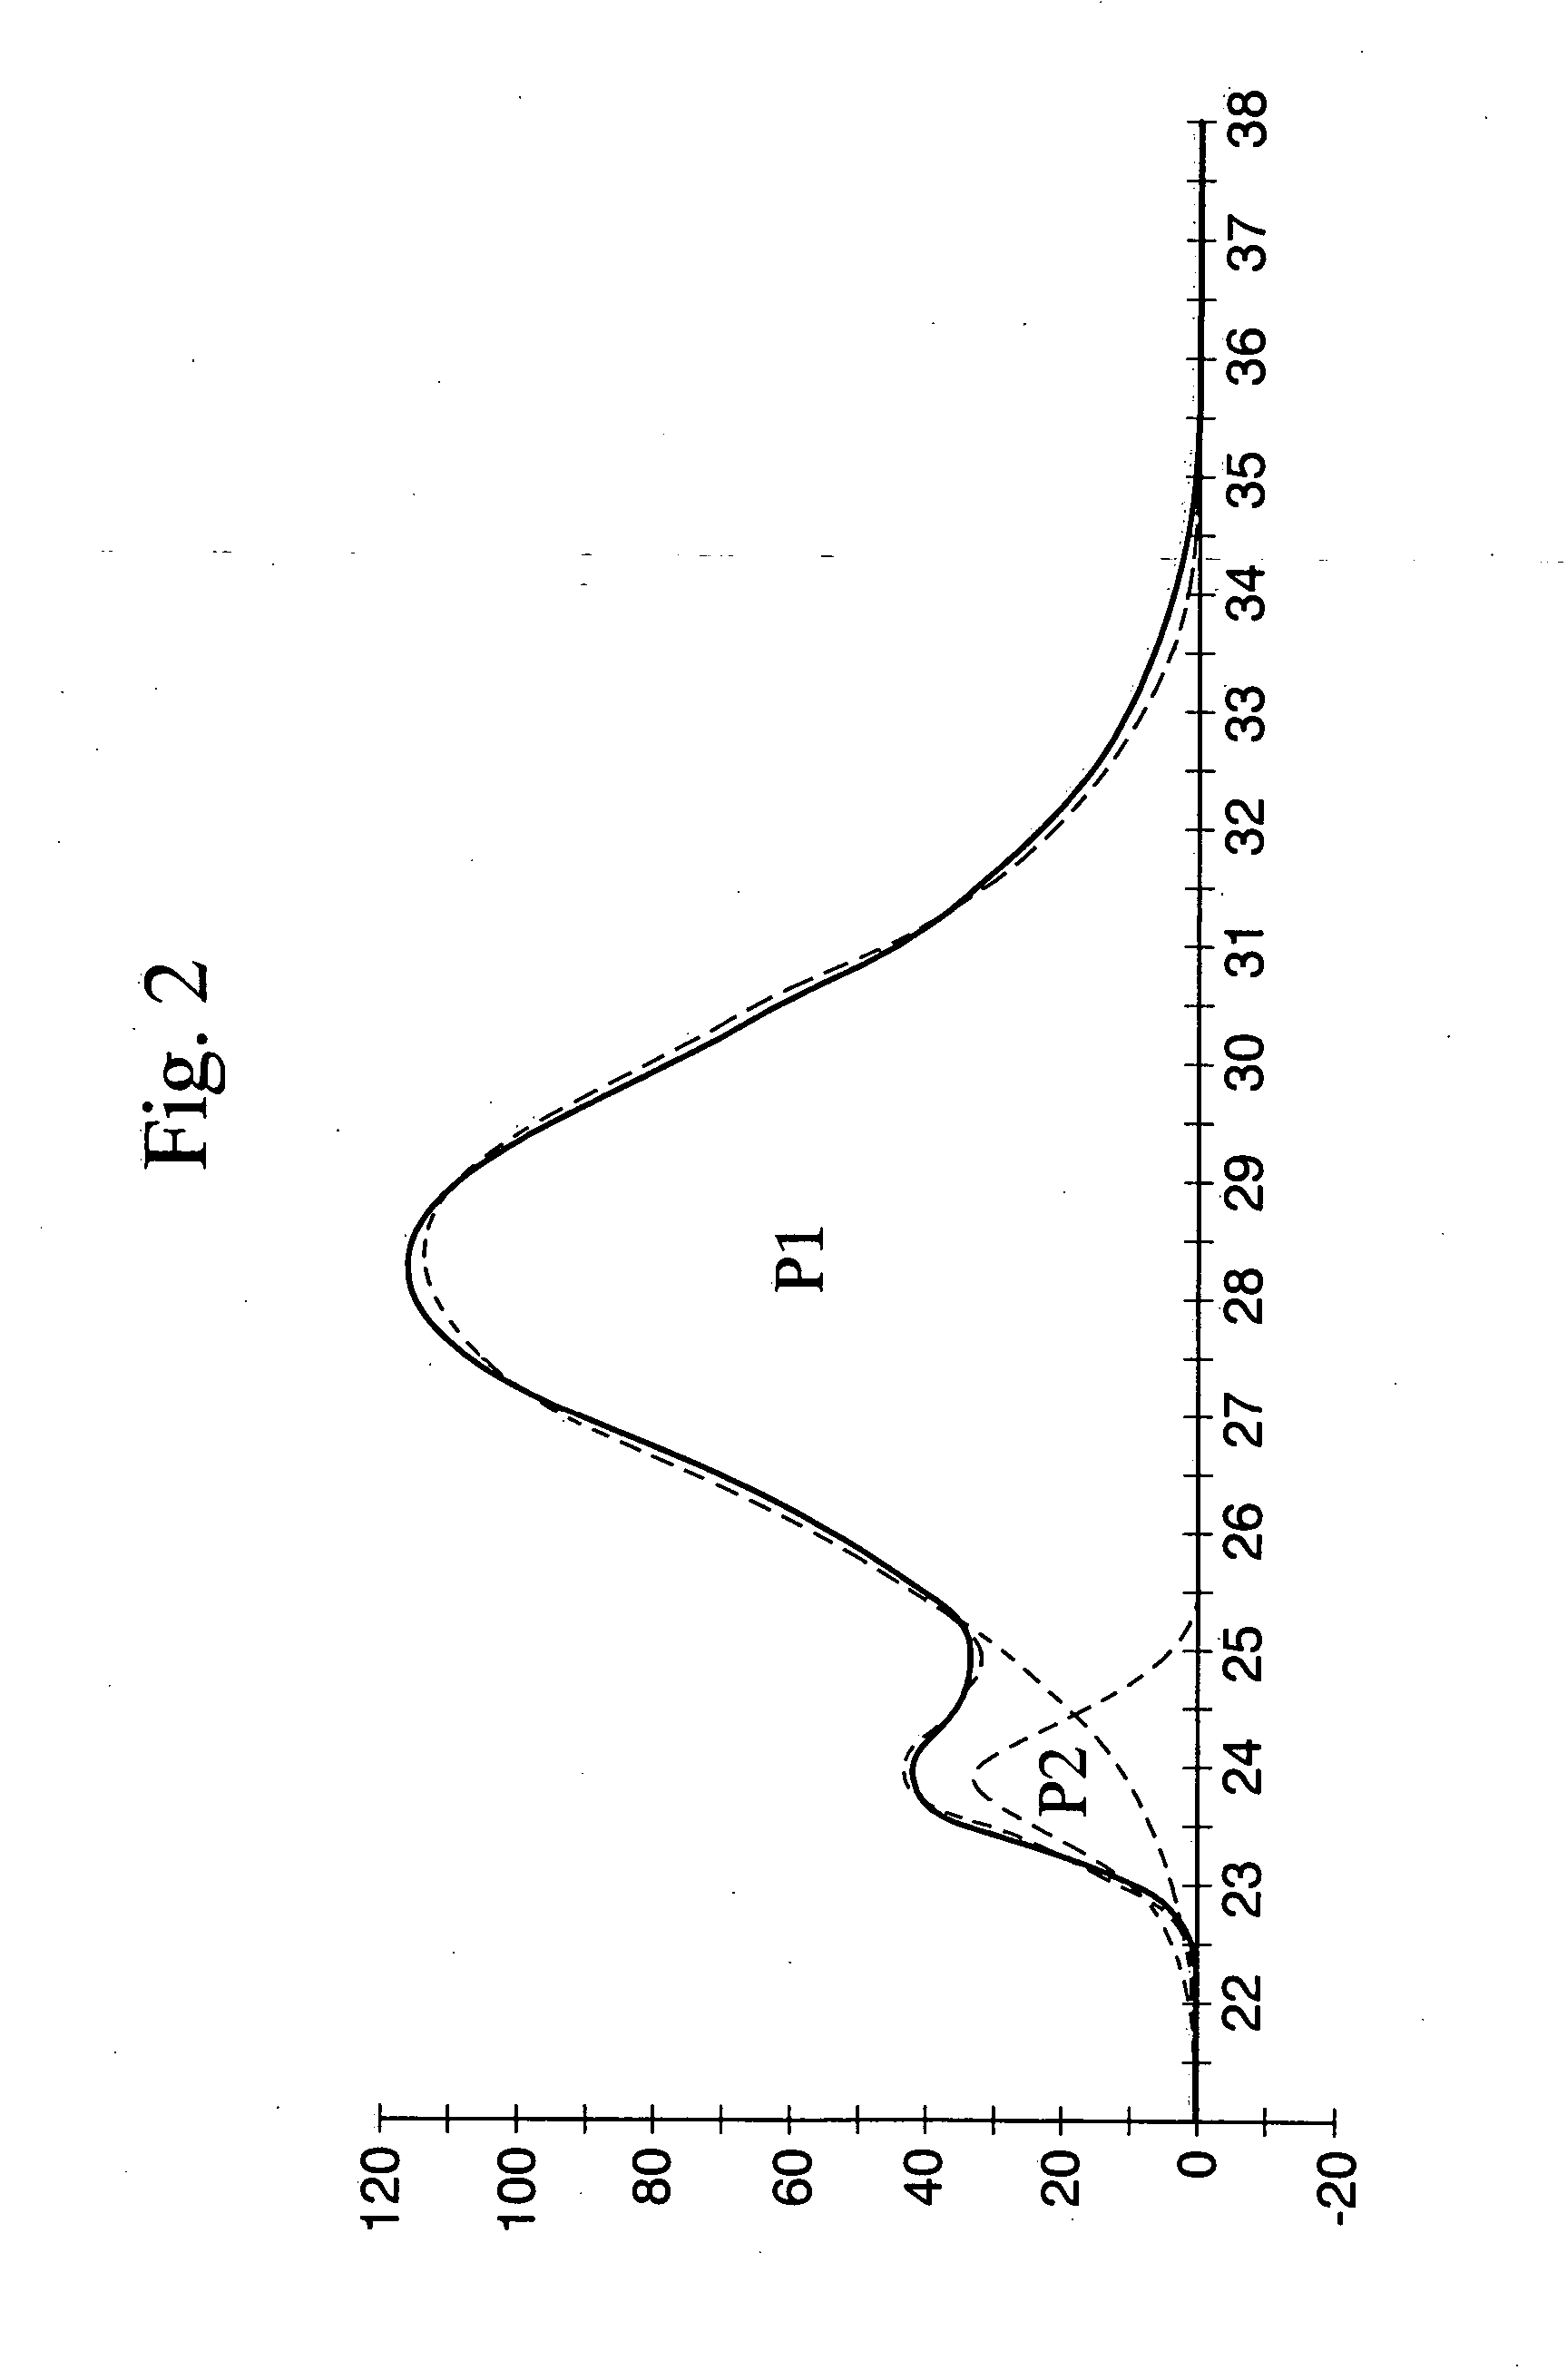 Styrene resin composition and process for producing the same